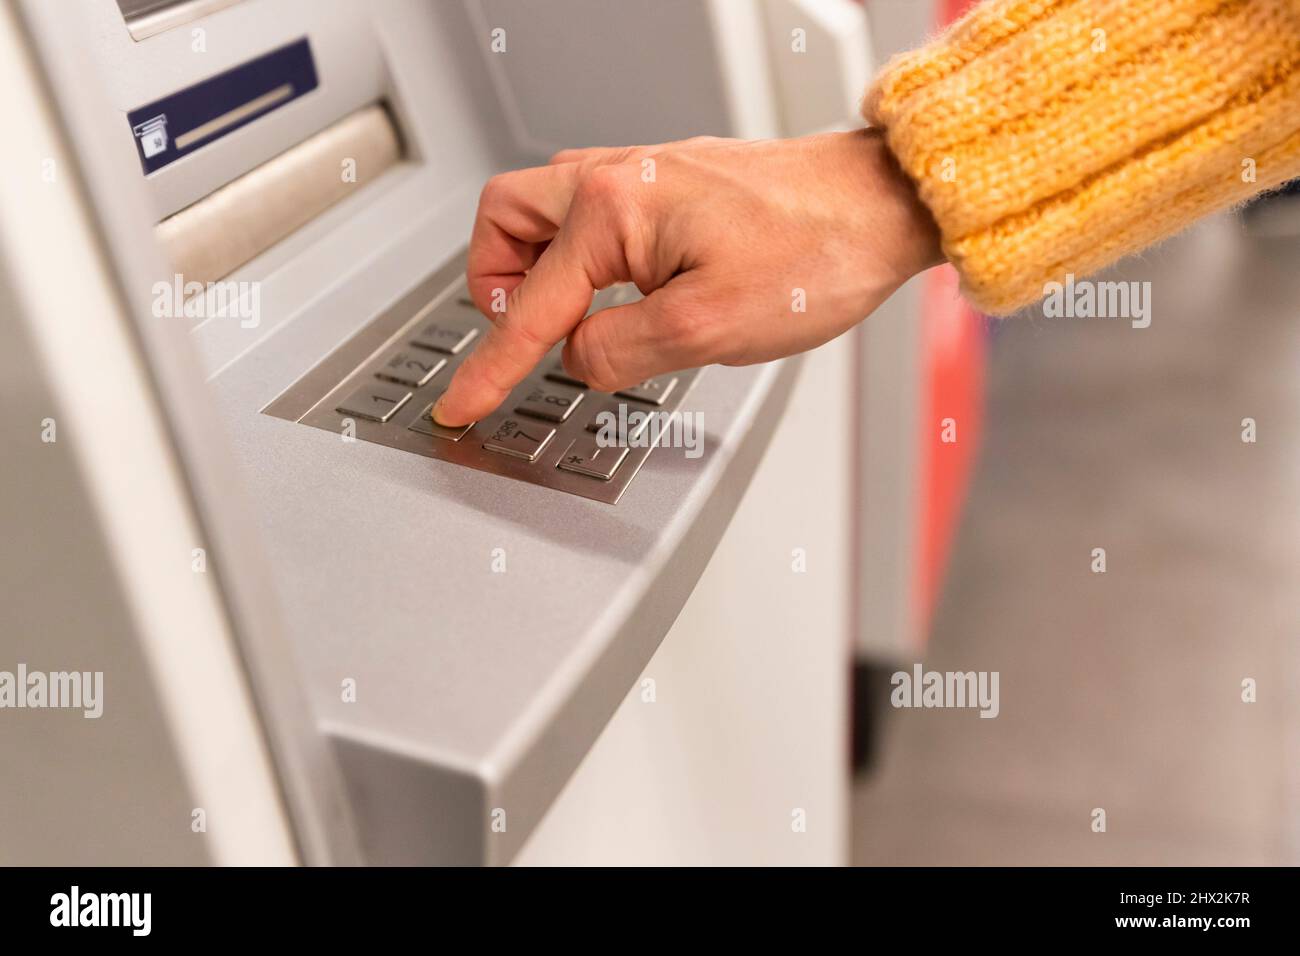 Close up of a womans hand entering secret code on the keypad of an ATM machine. Stock Photo